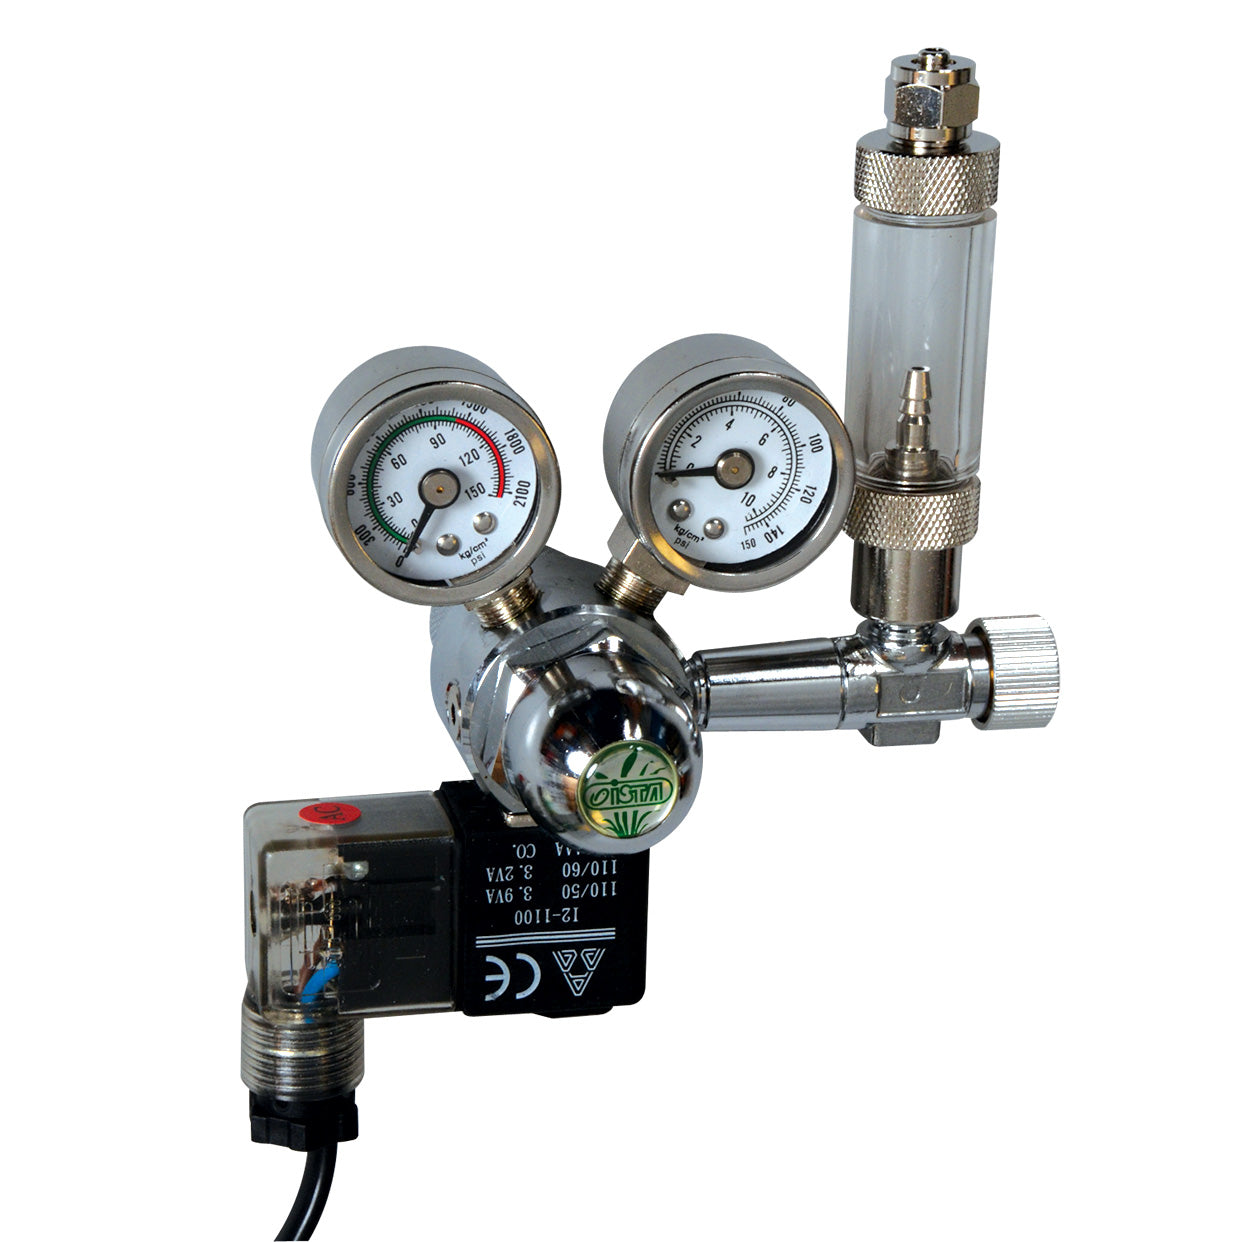 Ista CO2 Regulator w Solenoid and Bubble Counter